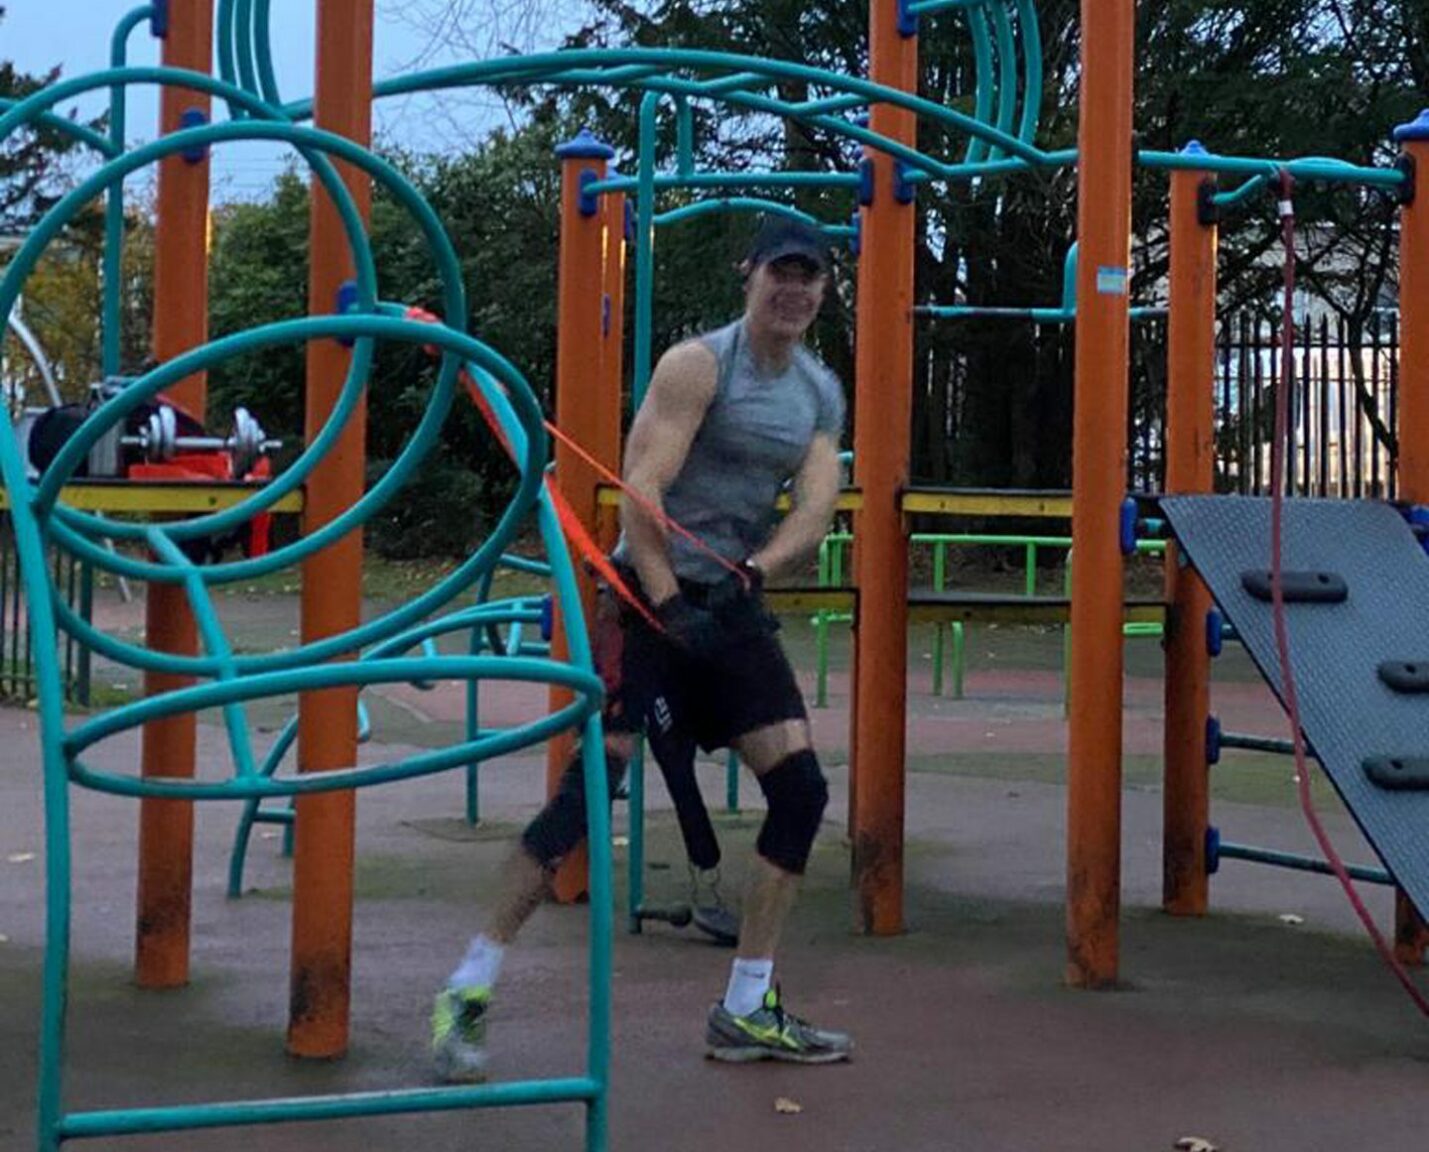 Council backs outdoor gyms in Aberdeen parks following petition